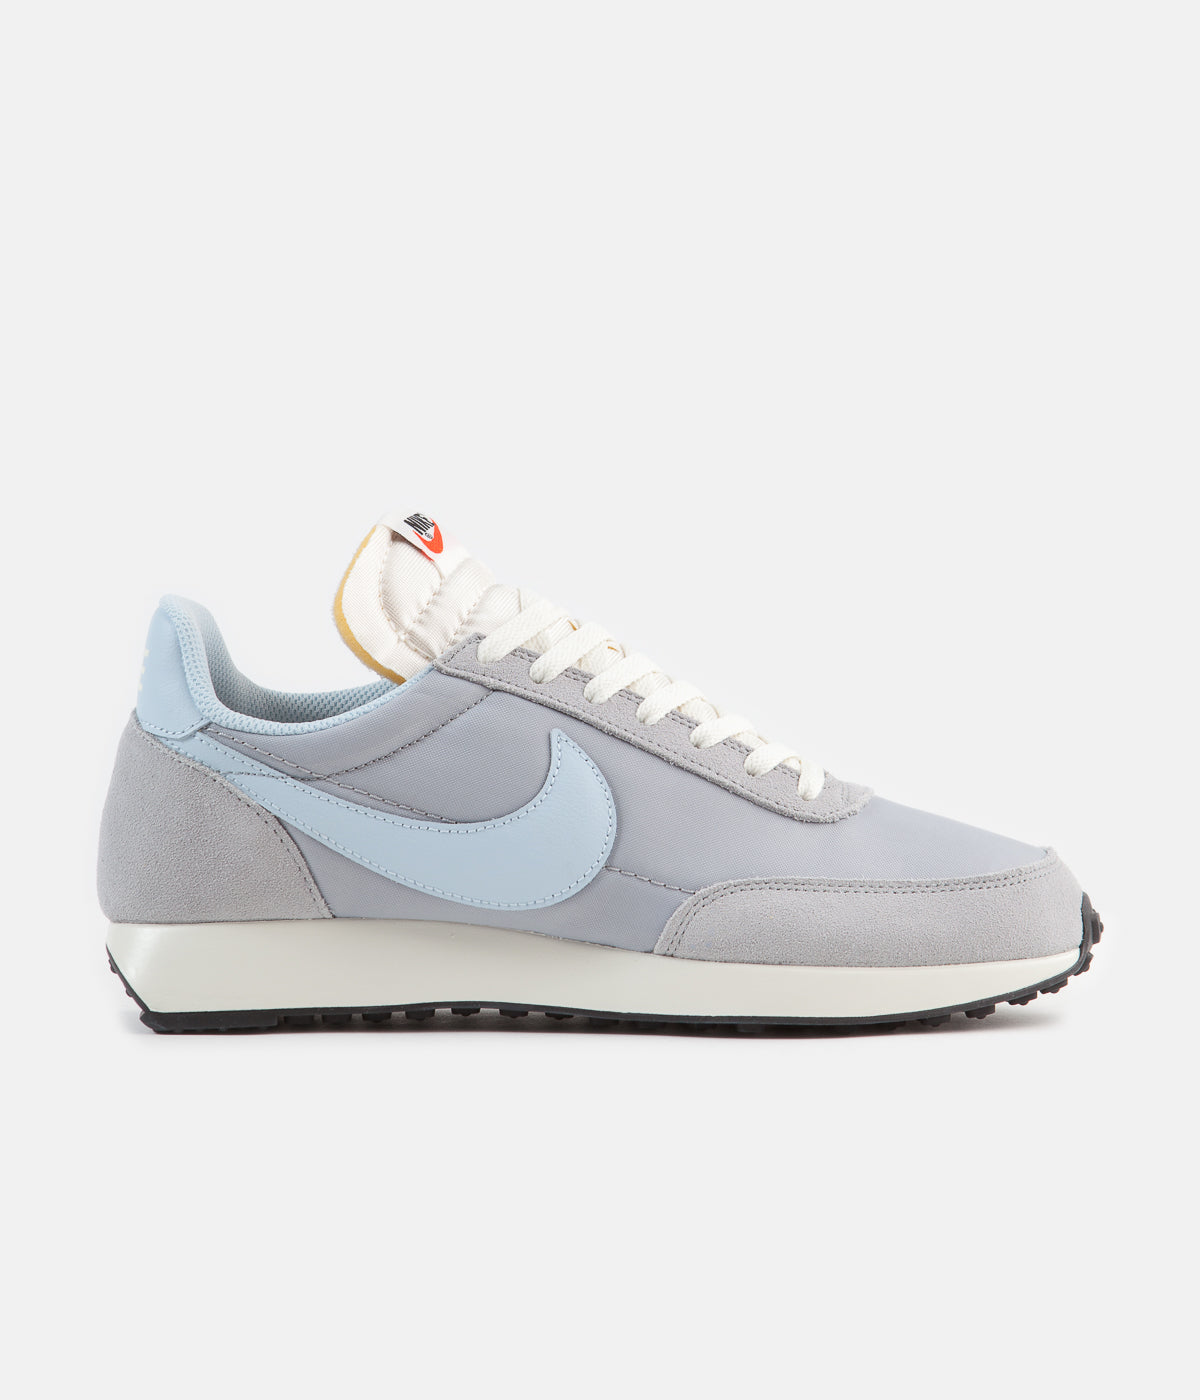 Nike Air Tailwind 79 Shoes - Wolf Grey 